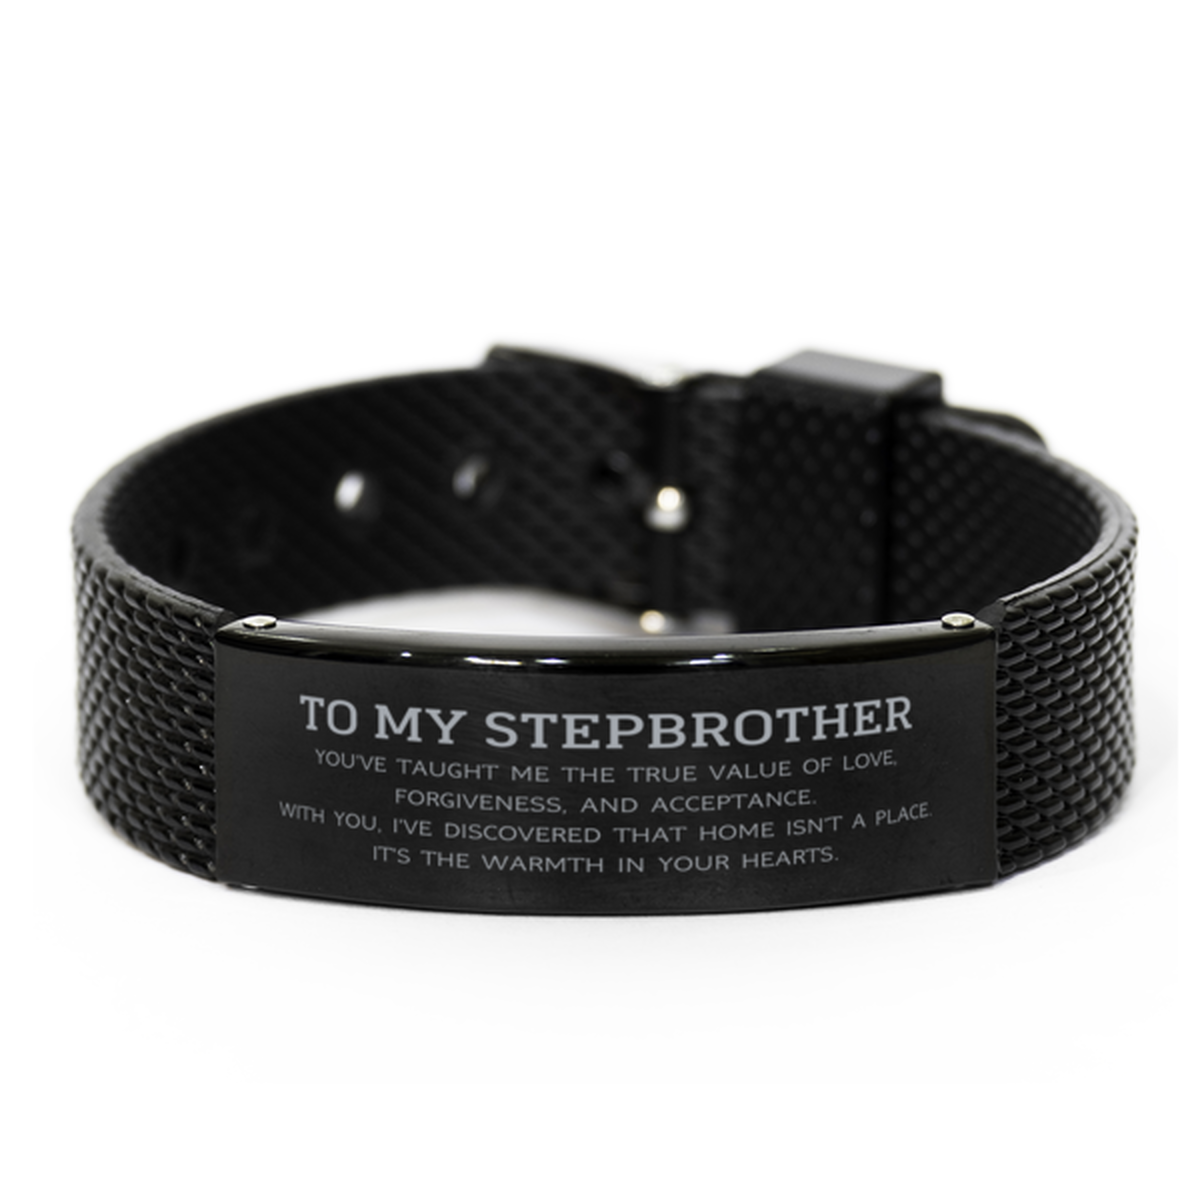 To My Stepbrother Gifts, You've taught me the true value of love, Thank You Gifts For Stepbrother, Birthday Black Shark Mesh Bracelet For Stepbrother